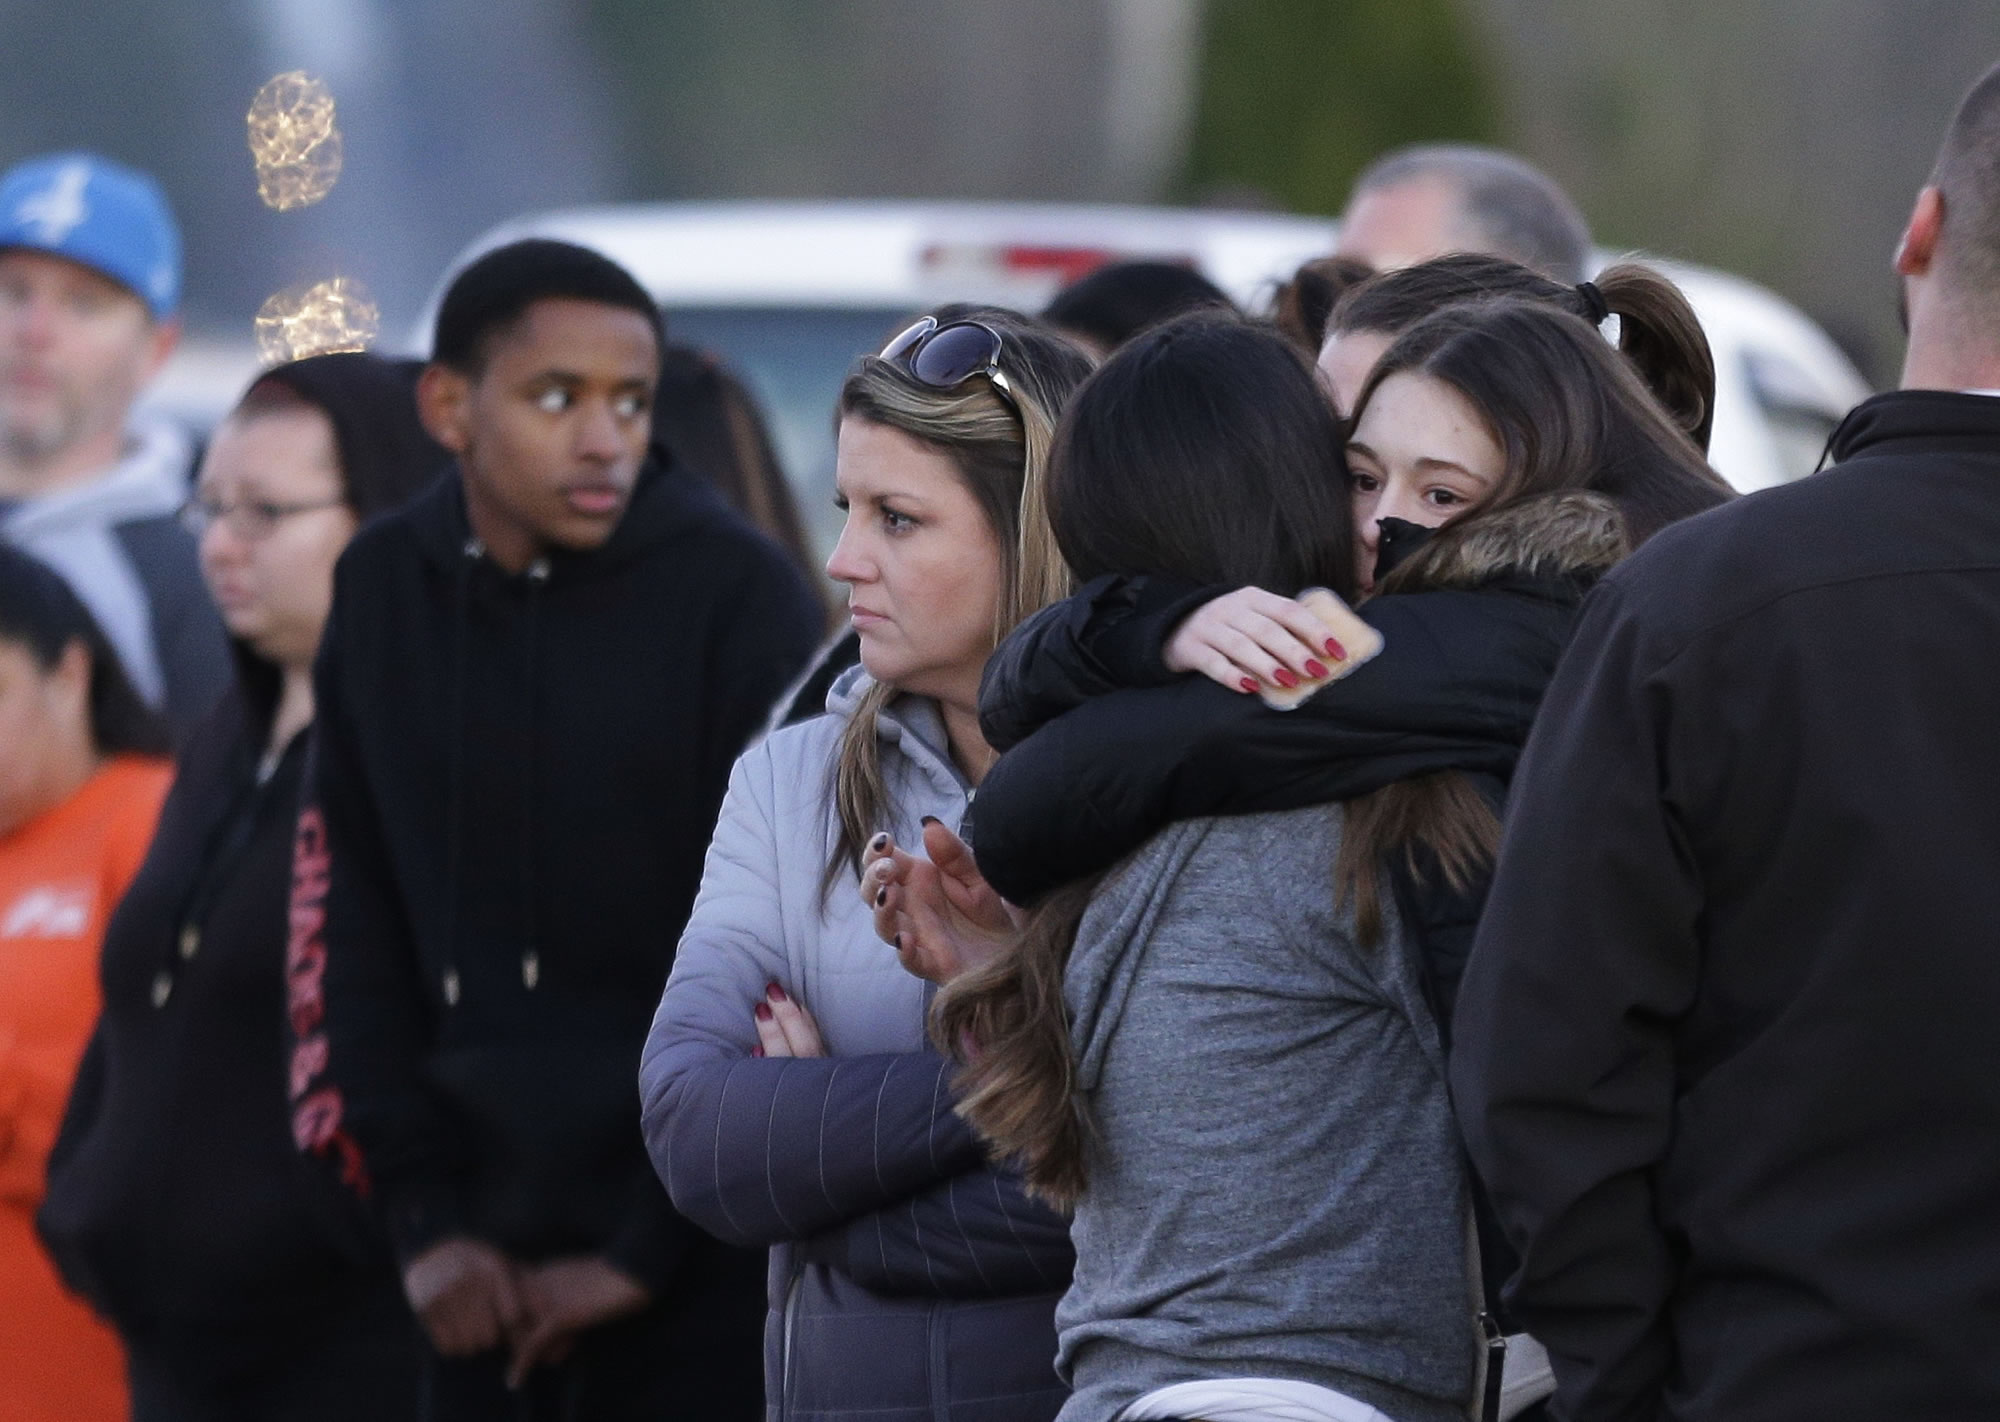 Two people hug as they wait to be reunited with students on lockdown near Graham-Kapowsin High School, Frontier Middle School, and Nelson Elementary School, Tuesday, Dec. 5, 2017, in Graham, Wash. Authorities said two students were shot near the high school Tuesday afternoon. (AP Photo/Ted S.